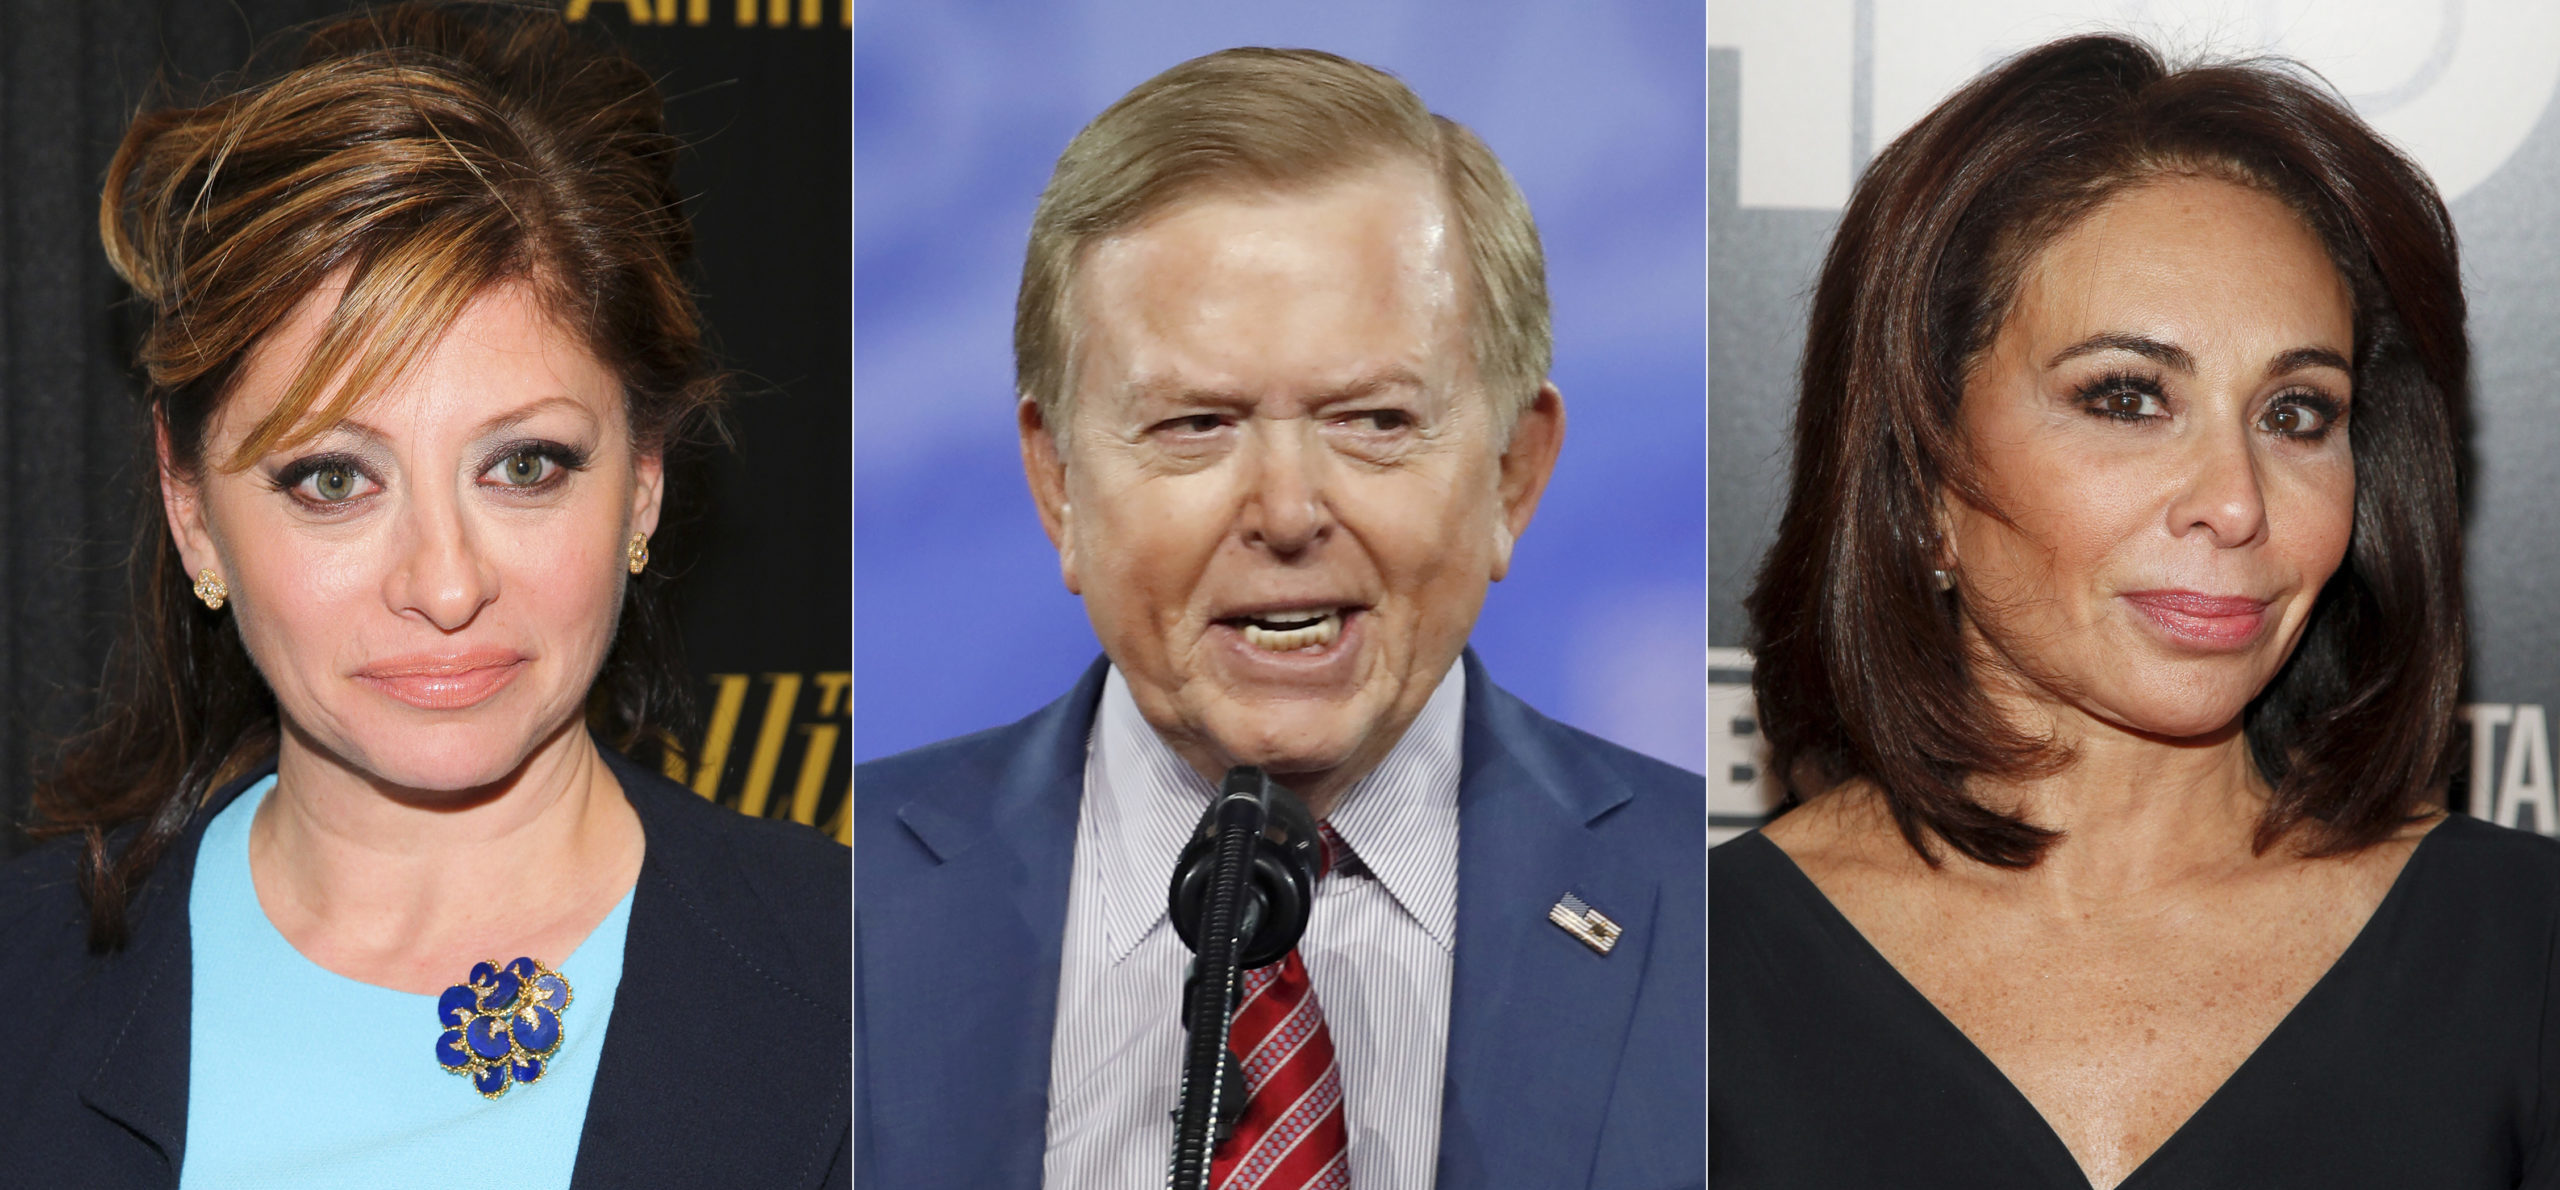 This photo shows, from left, Maria Bartiromo in New York on April 6, 2016, Lou Dobbs at the Conservative Political Action Conference in Oxon Hill, Maryland, on Feb. 24, 2017, and Jeanine Pirro in New York on Jan. 28, 2015.